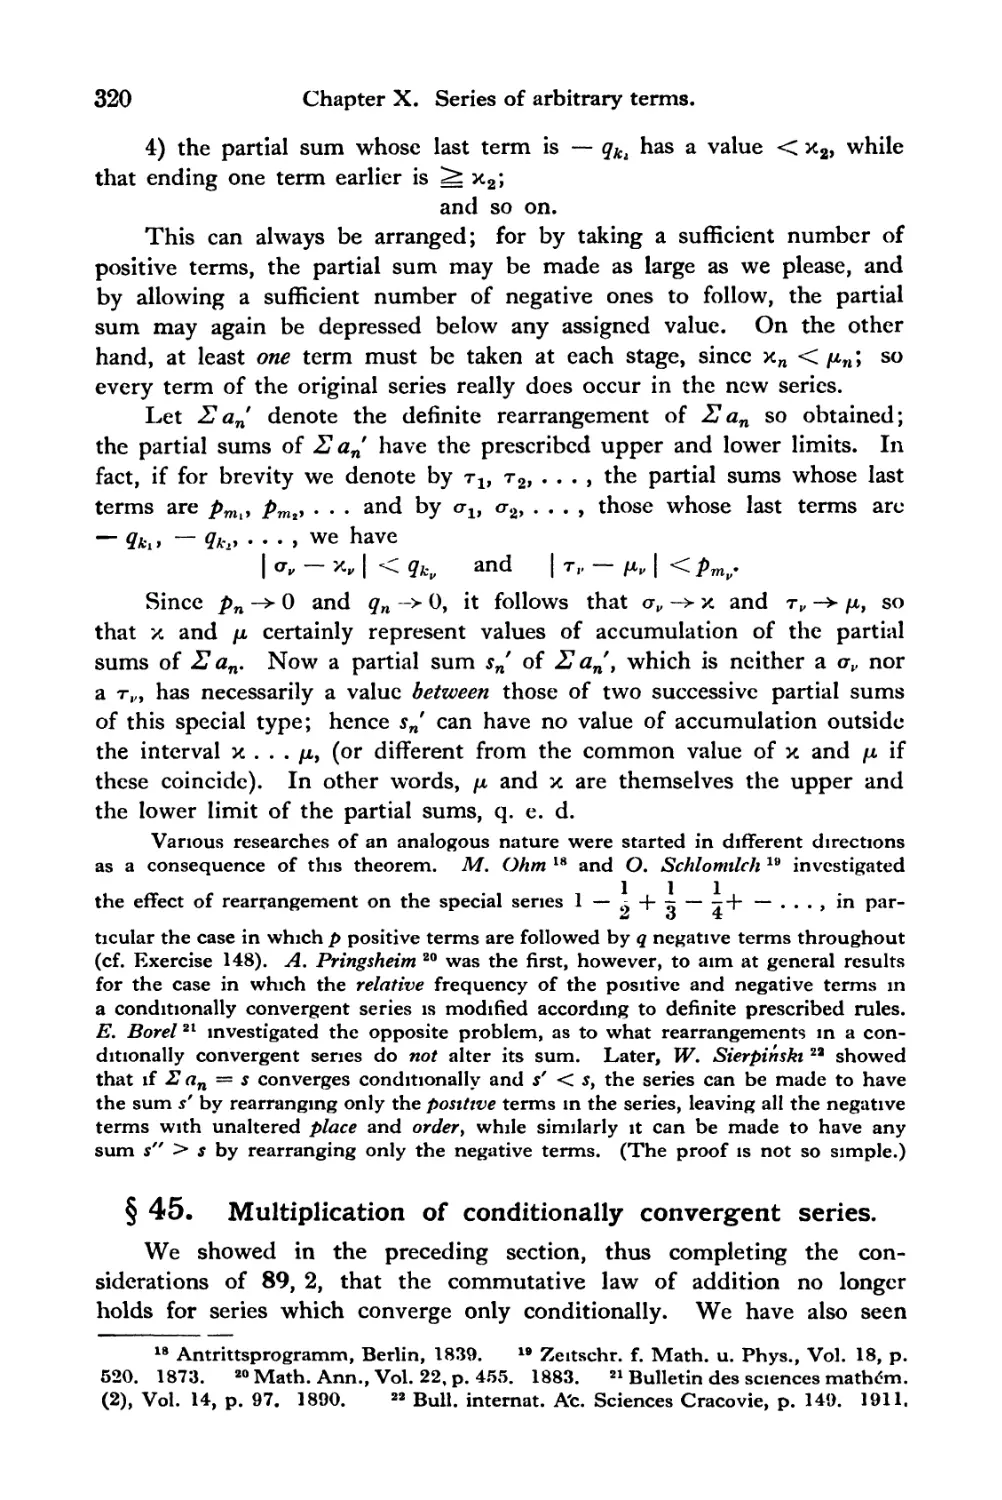 § 45. Multiplication of conditionally convergent series